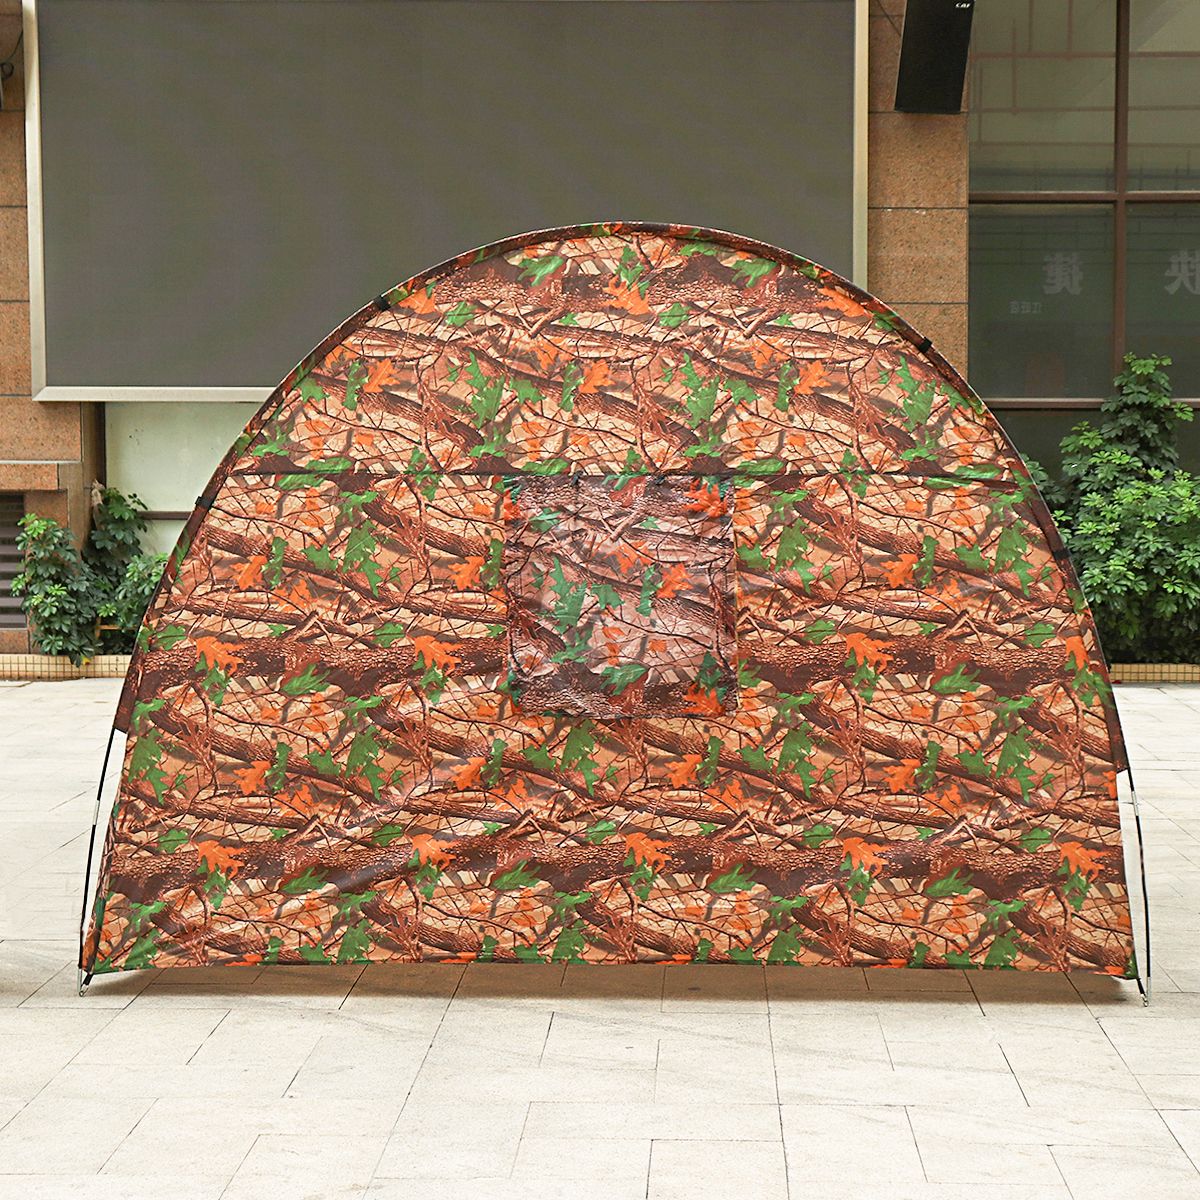 48m-8-10-Person-Tent-Instant-Camping-Waterproof-Camouflage-Outdoor-For-Family-1763337